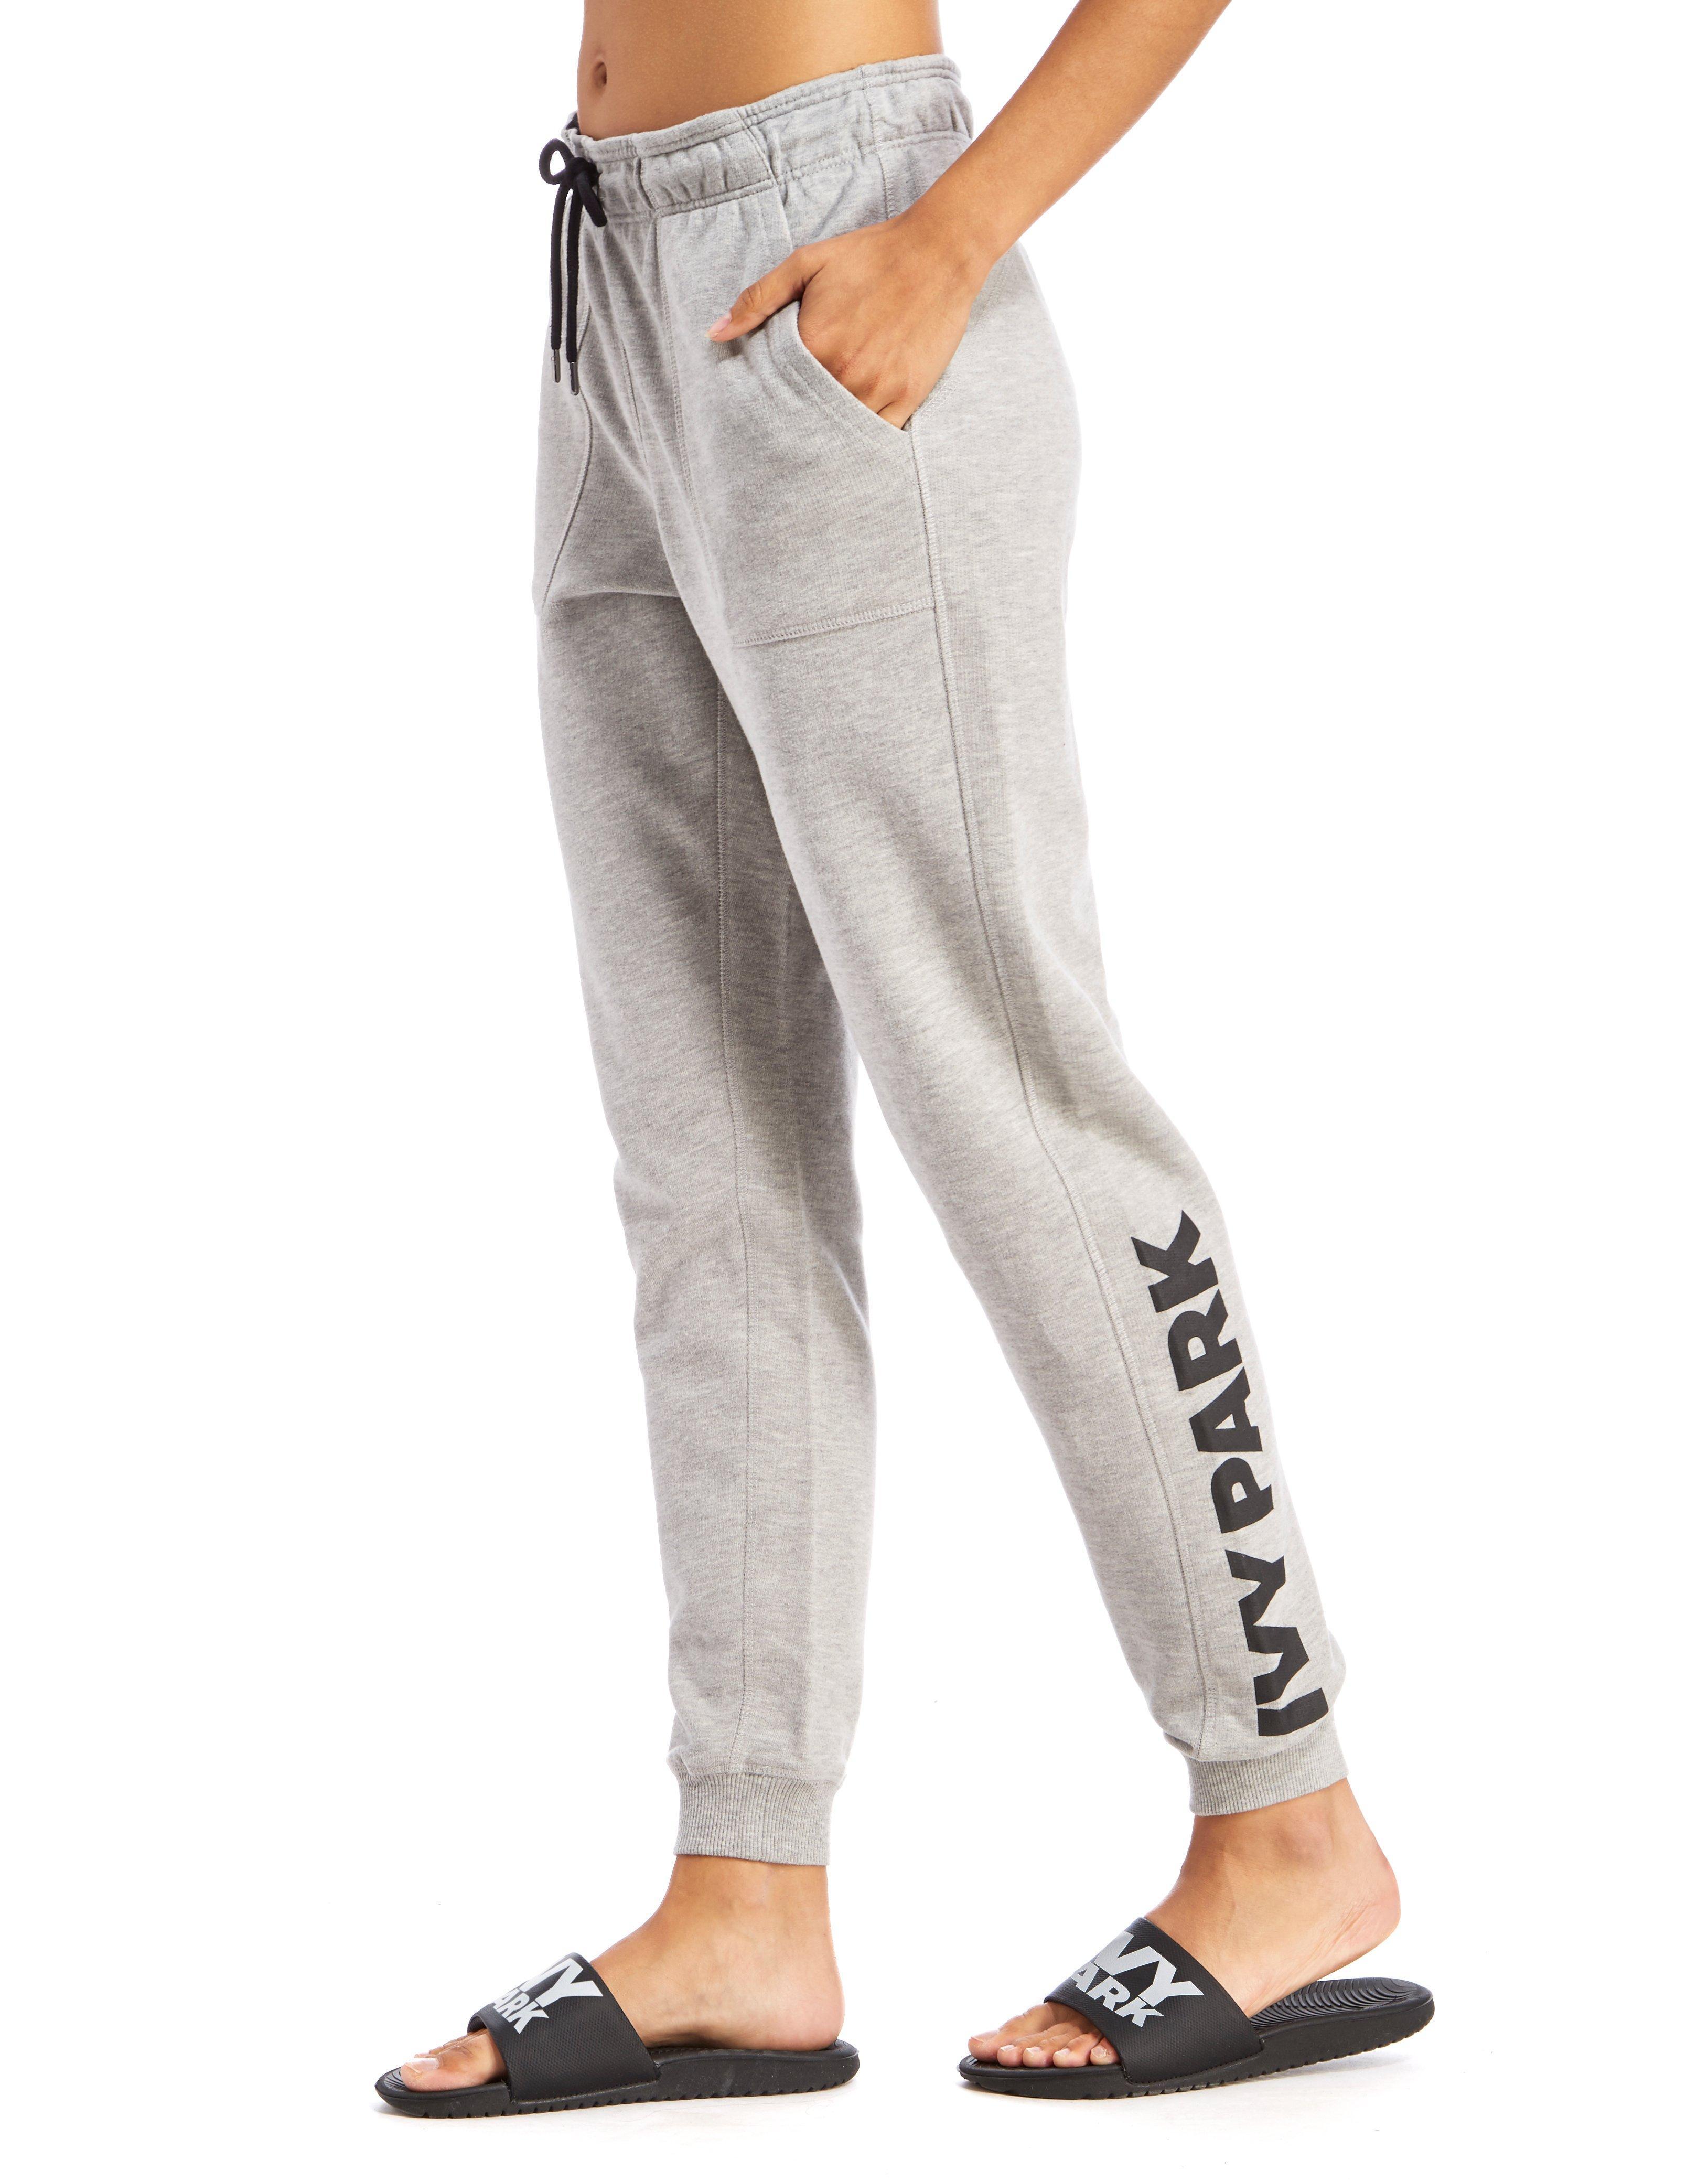 Lyst - Ivy Park Jogging Pants in Gray